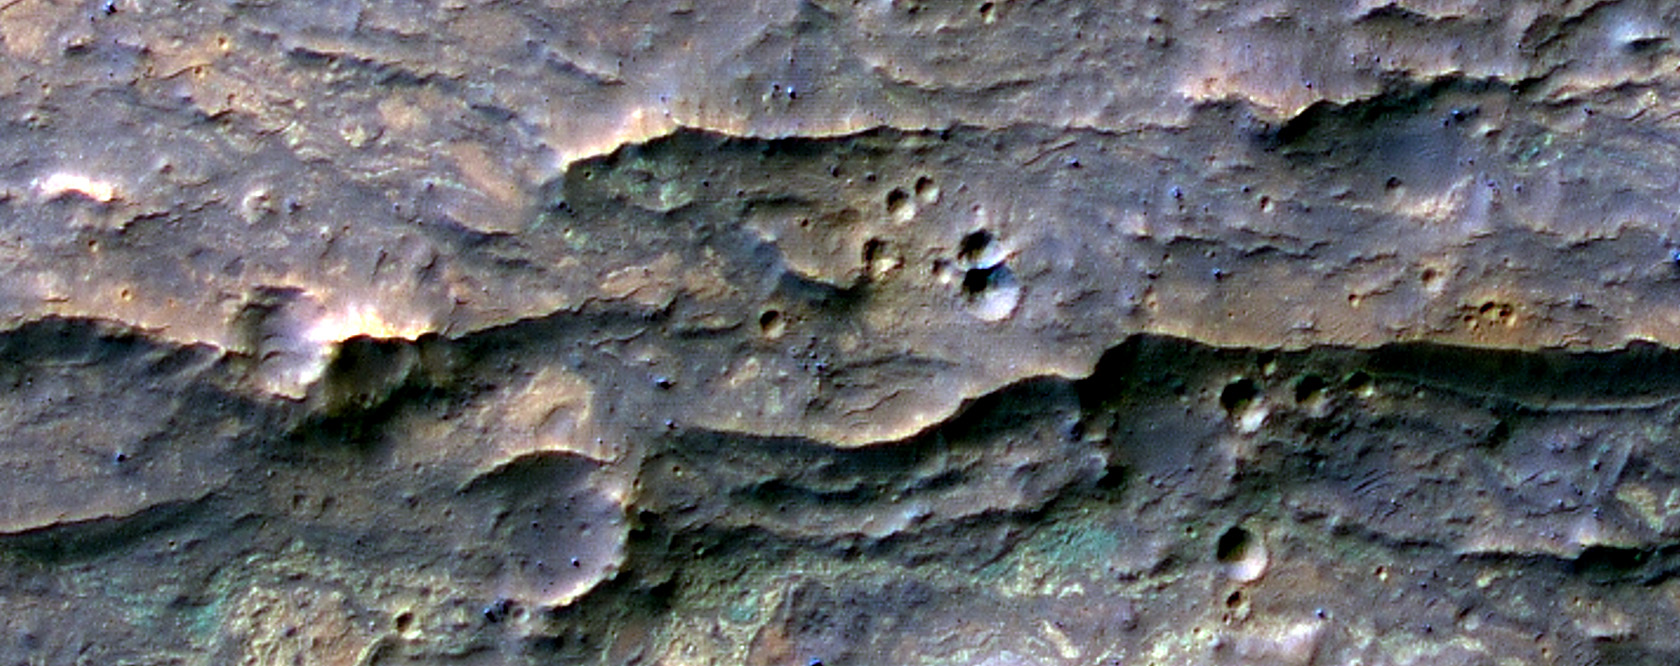 Colorful Terrain South of Eos Chasma